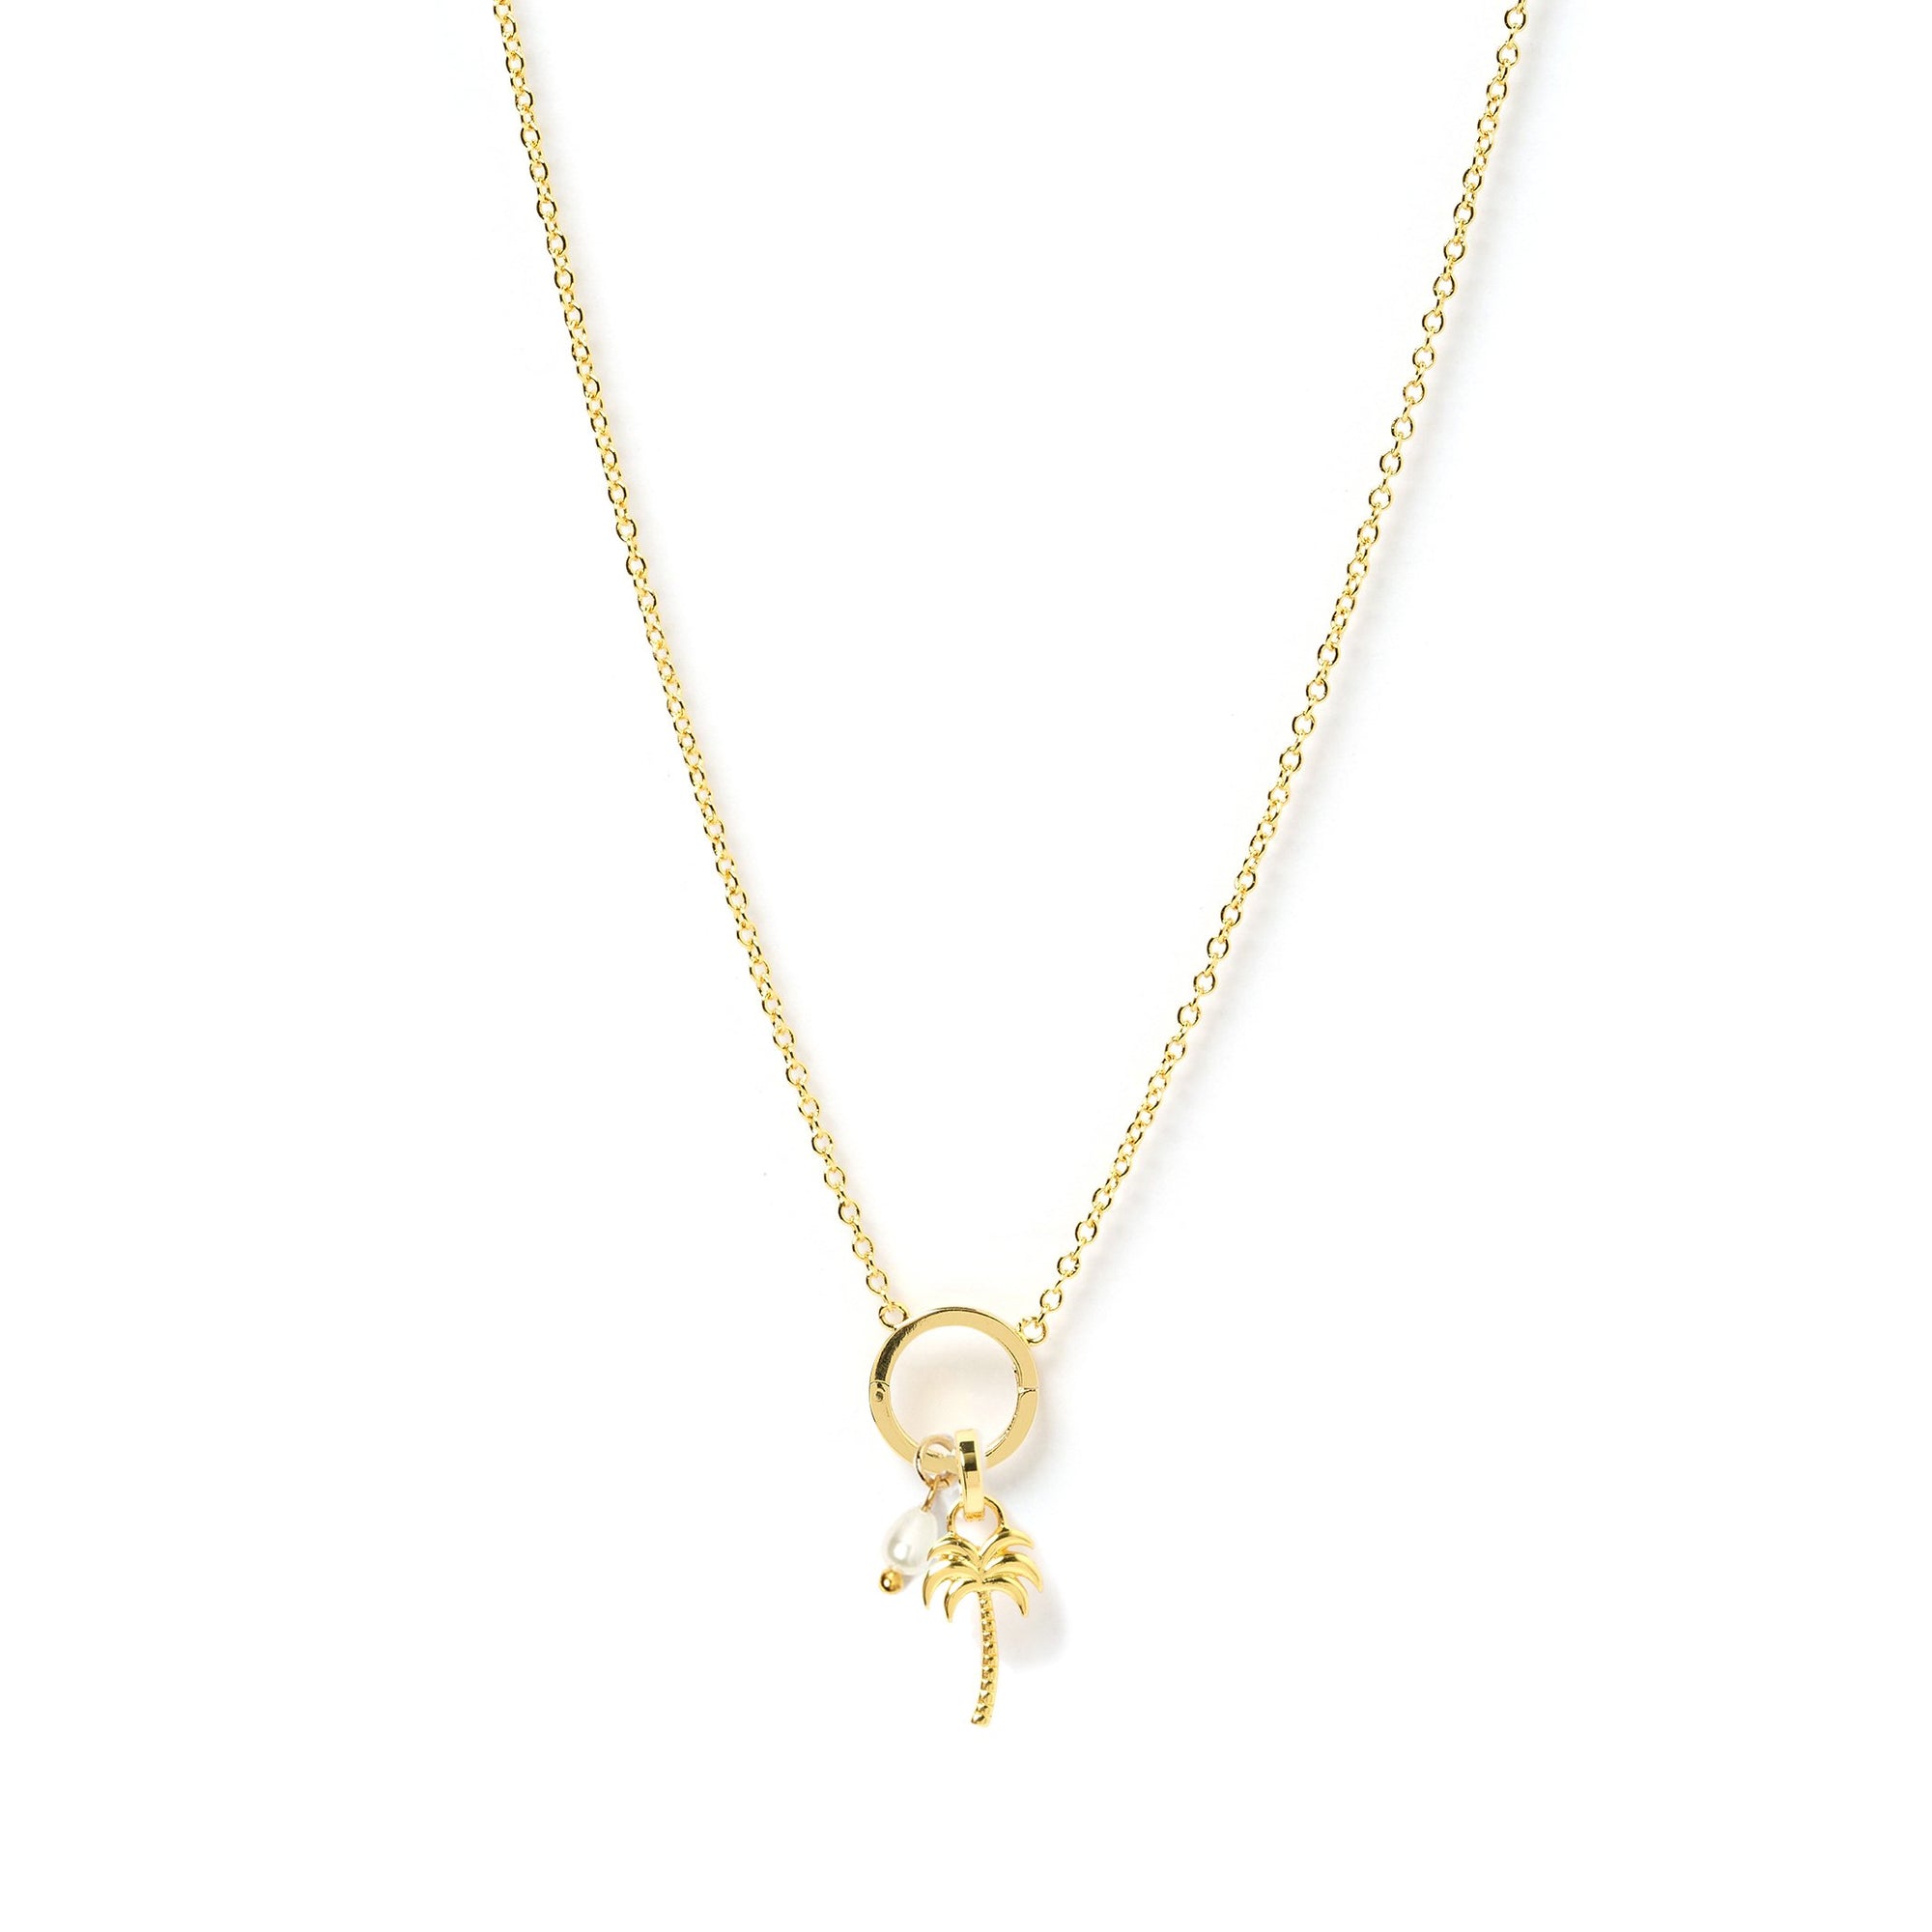 Arms Of Eve Palm Springs 'O' charm gold necklace featuring palm tree pendant, adding touch of tropical charm to any outfit